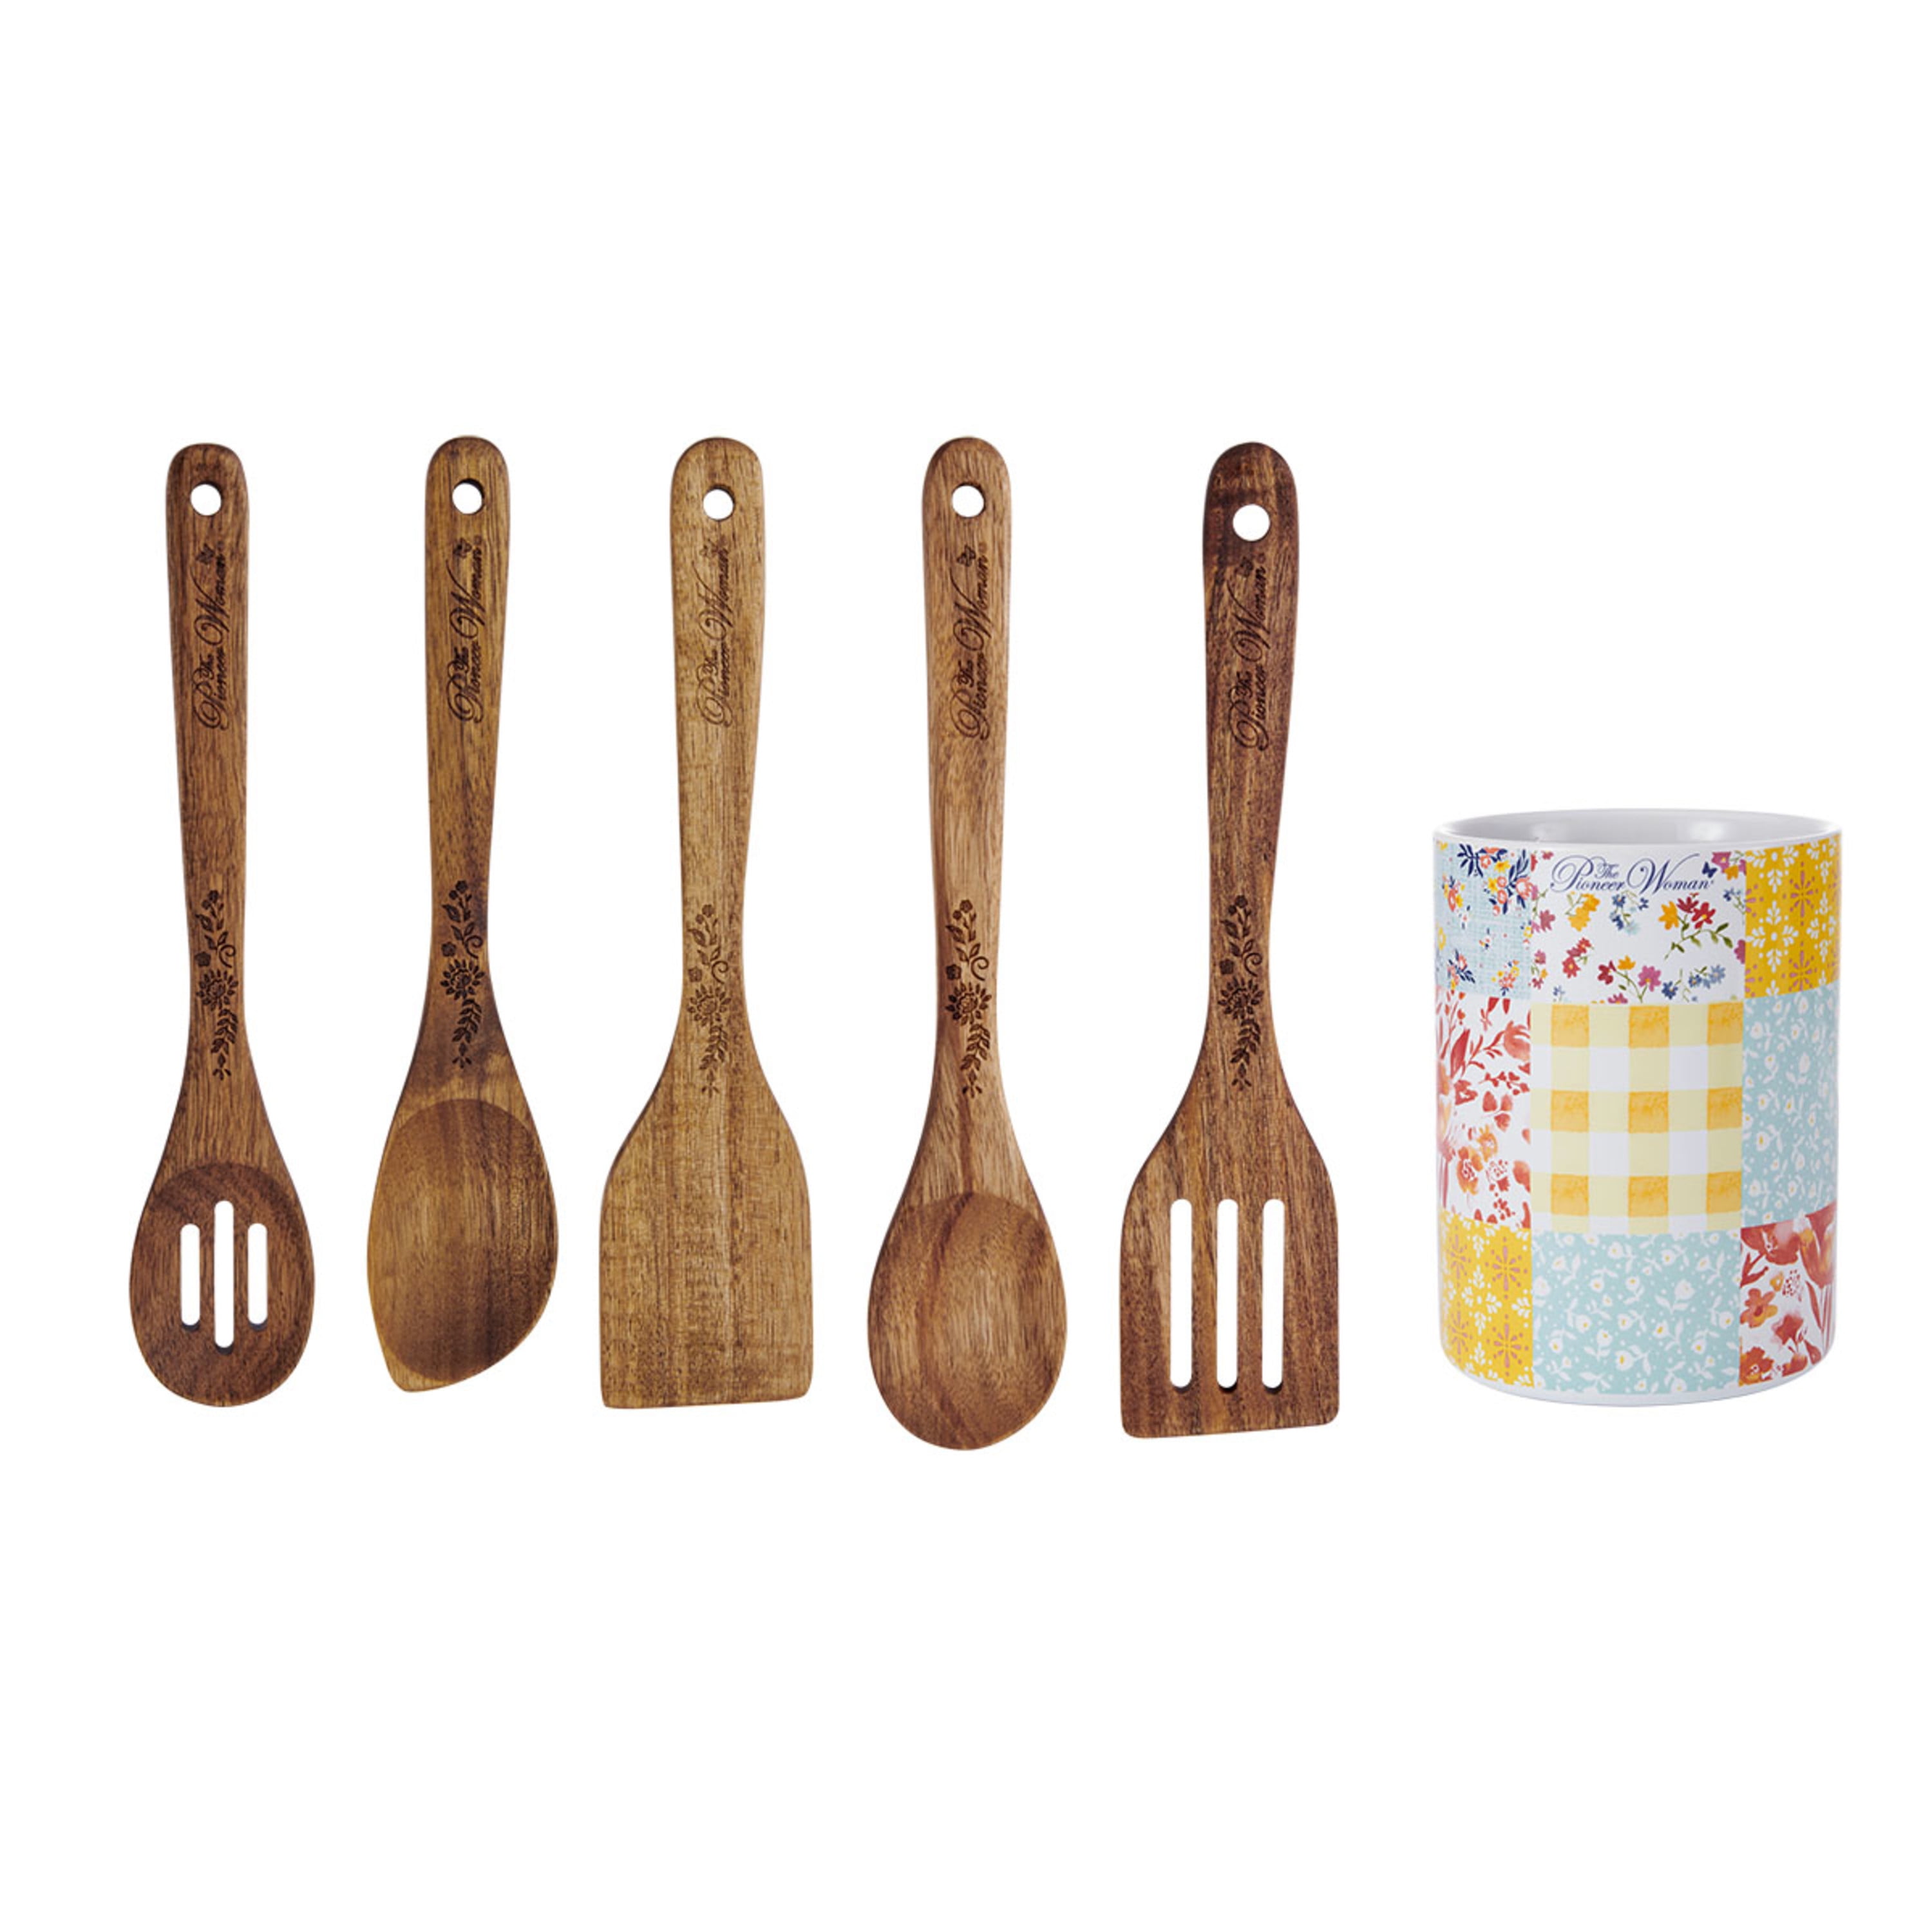 The Pioneer Woman 6-Piece Crock and Wooden Set, Slotted Spoon